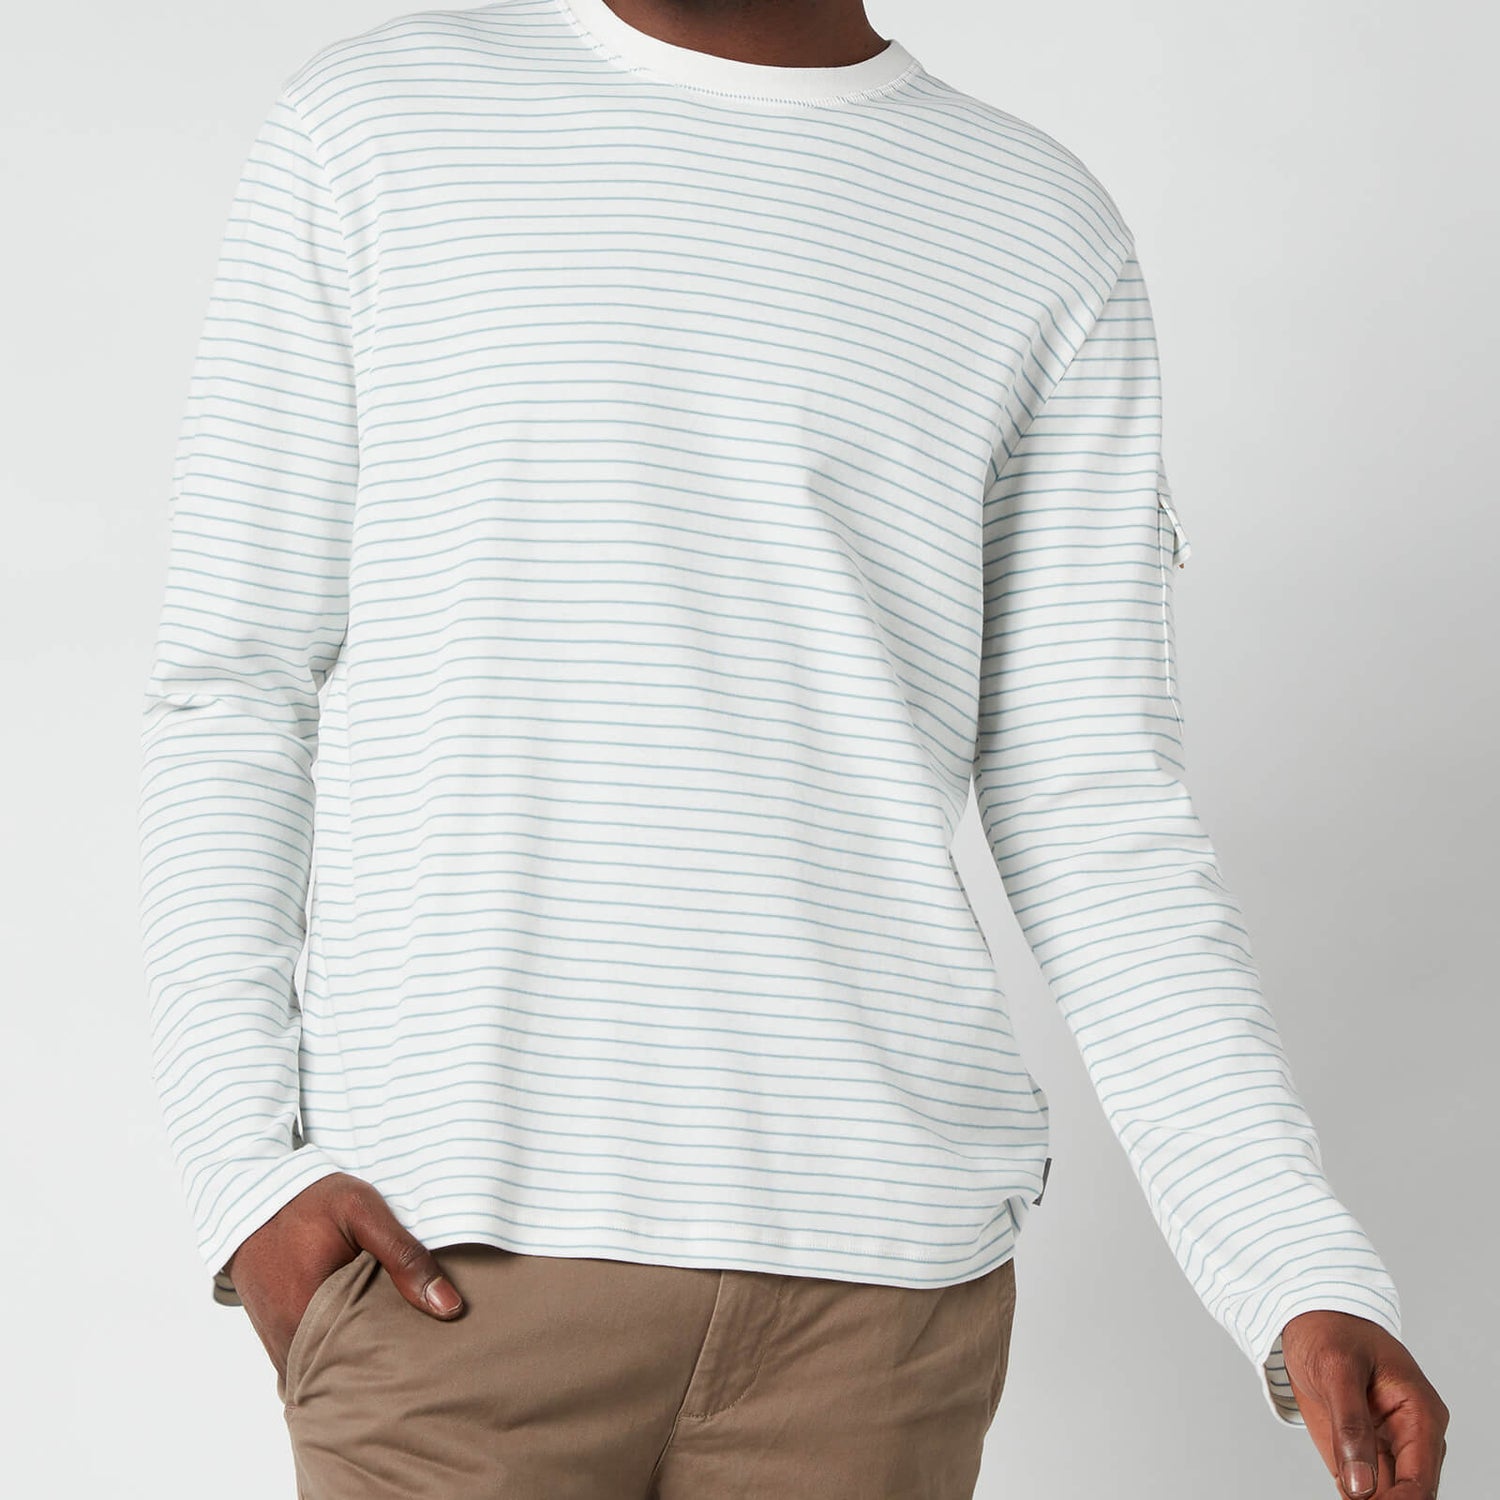 Ted Baker Men's Melted Striped Long Sleeve Top - White